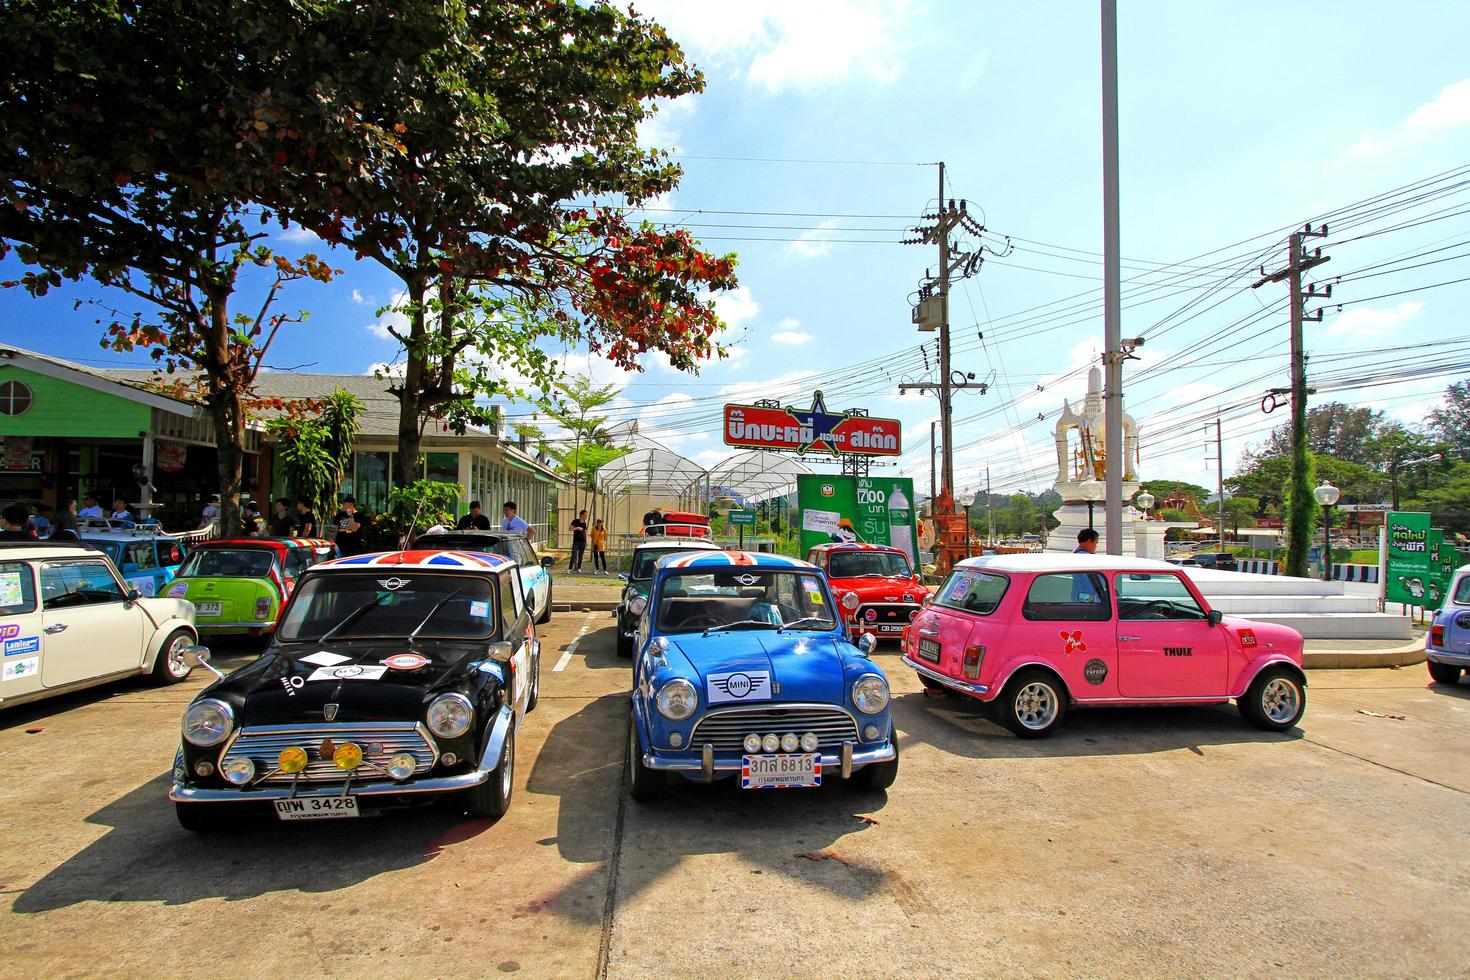 Nakhonratchasima, Thailand - January 31, 2023 Many beautiful Austin Mini cooper car parking on street with tree and blue sky background. Transportation, Classic or Vintage car and Vehicle concept photo